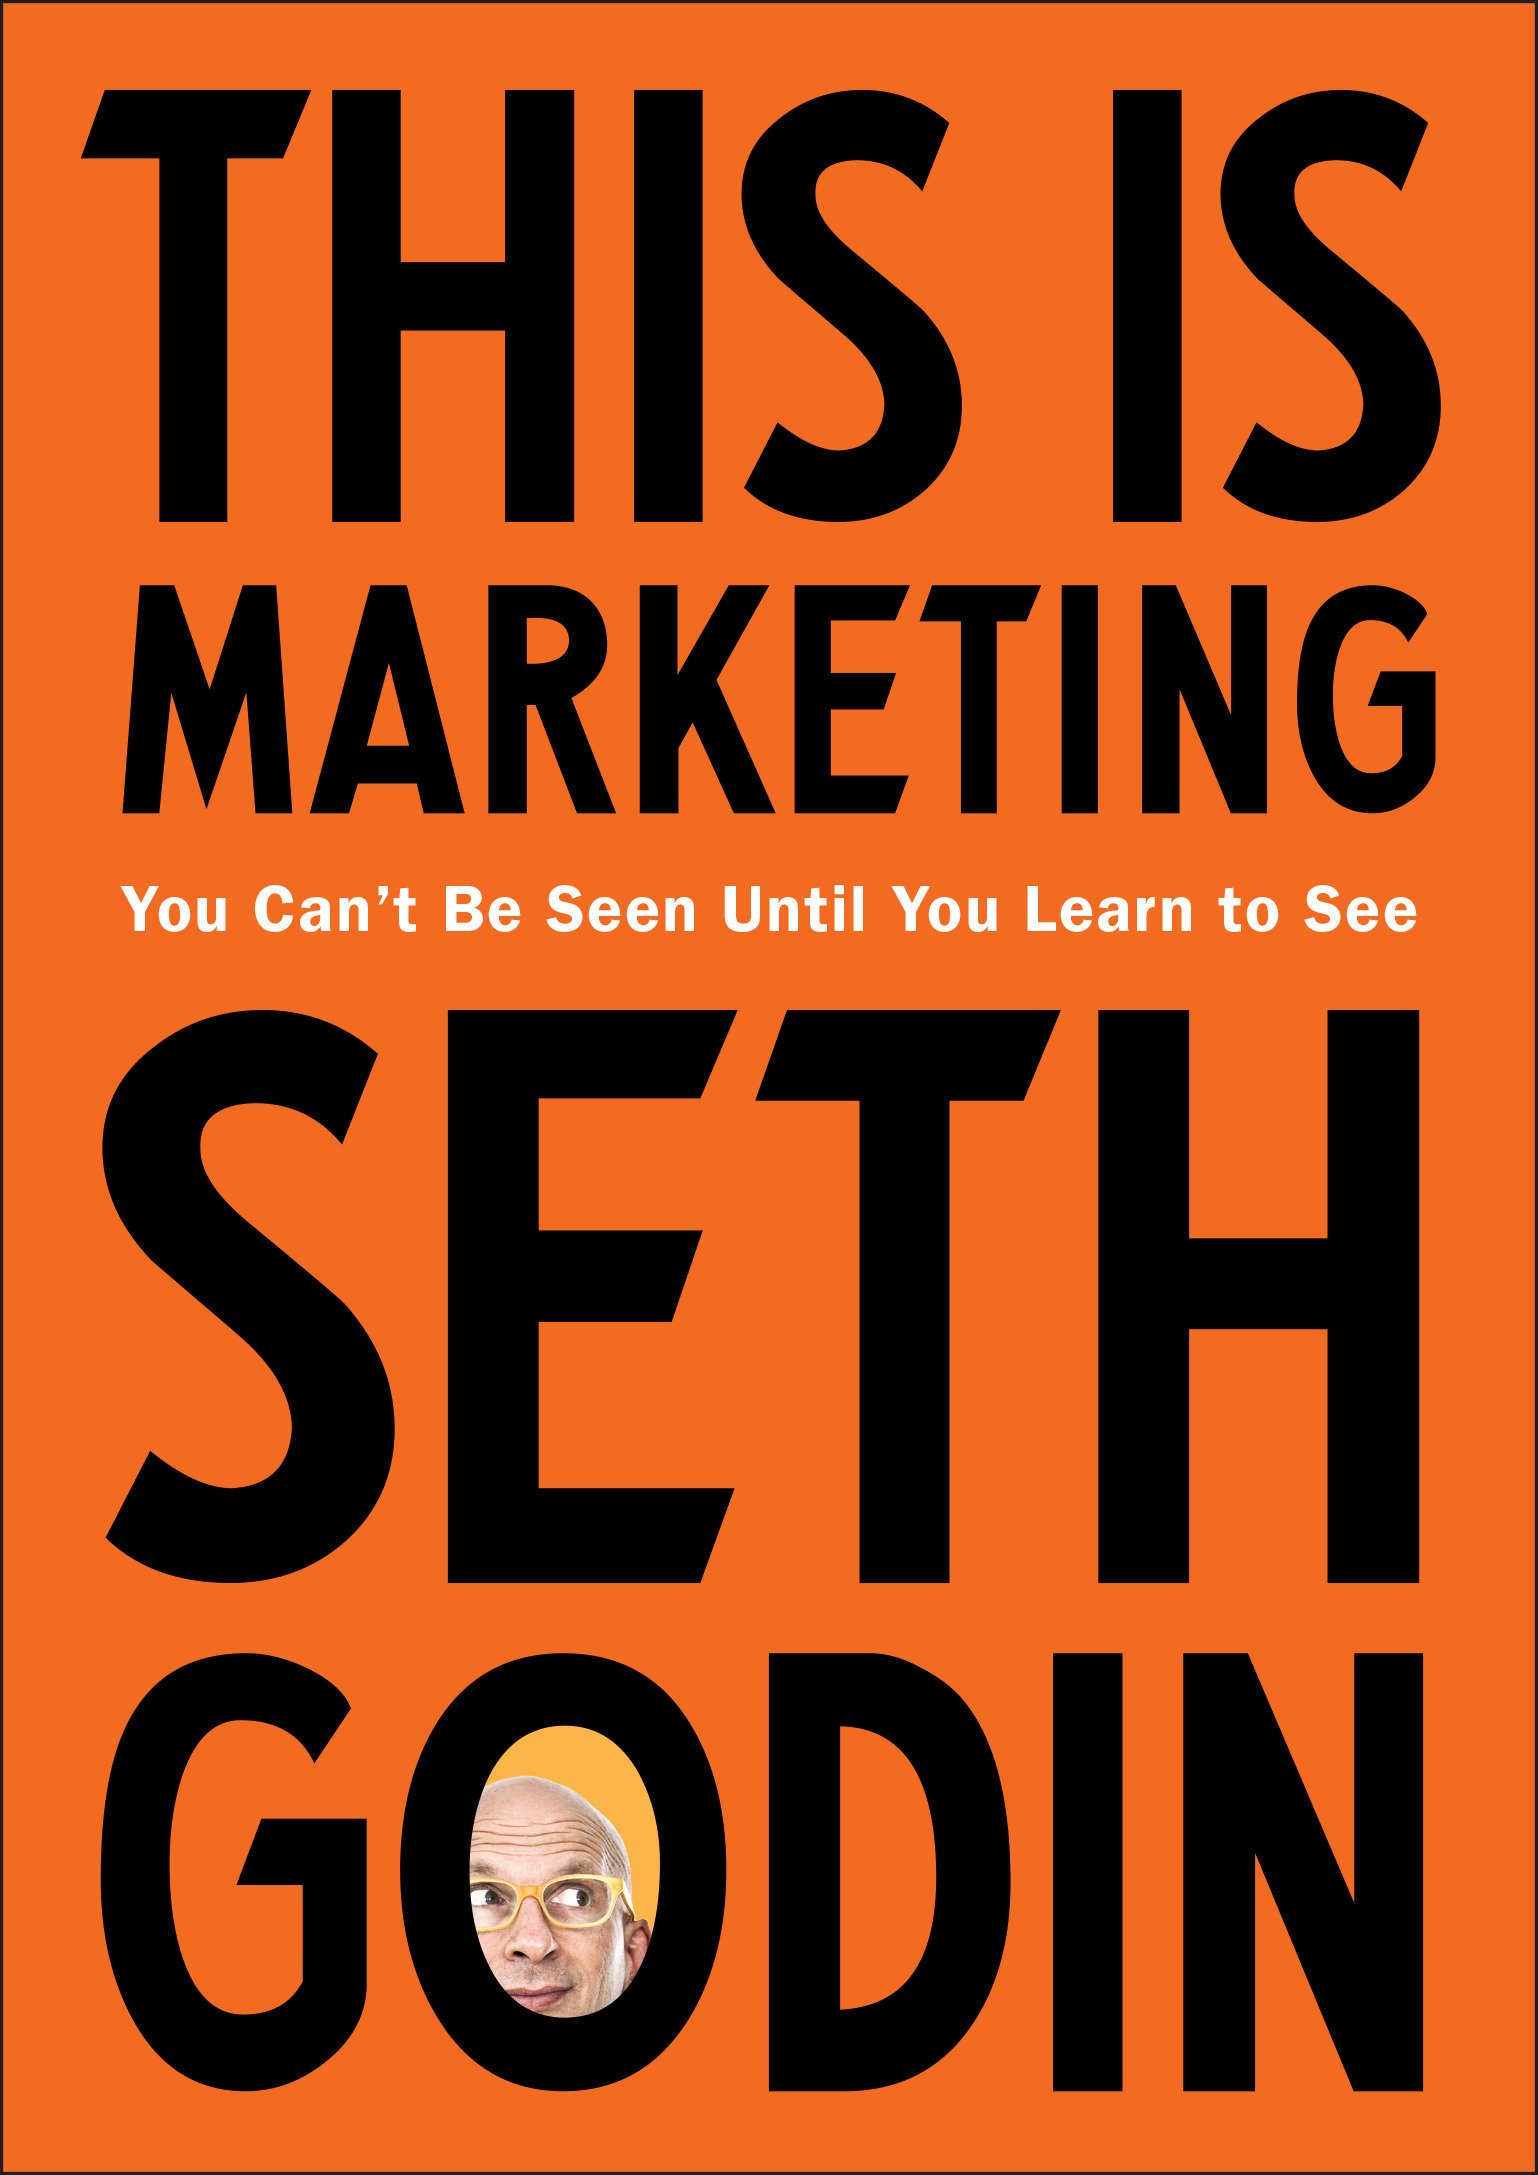 Book image of This is marketing.